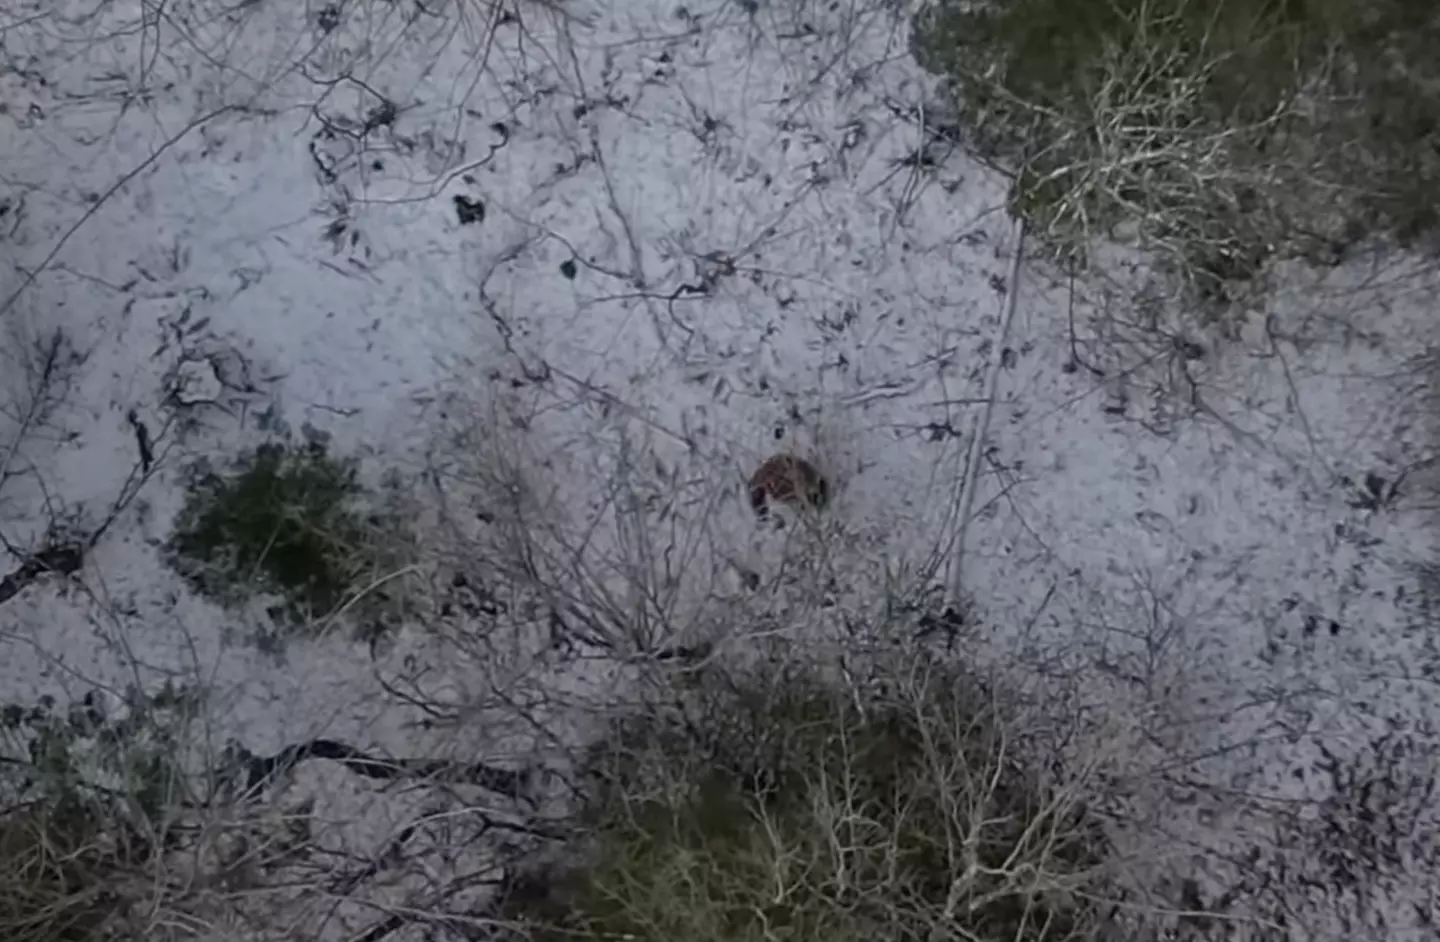 Drone footage of 'Bigfoot' has been doing the rounds on TikTok.